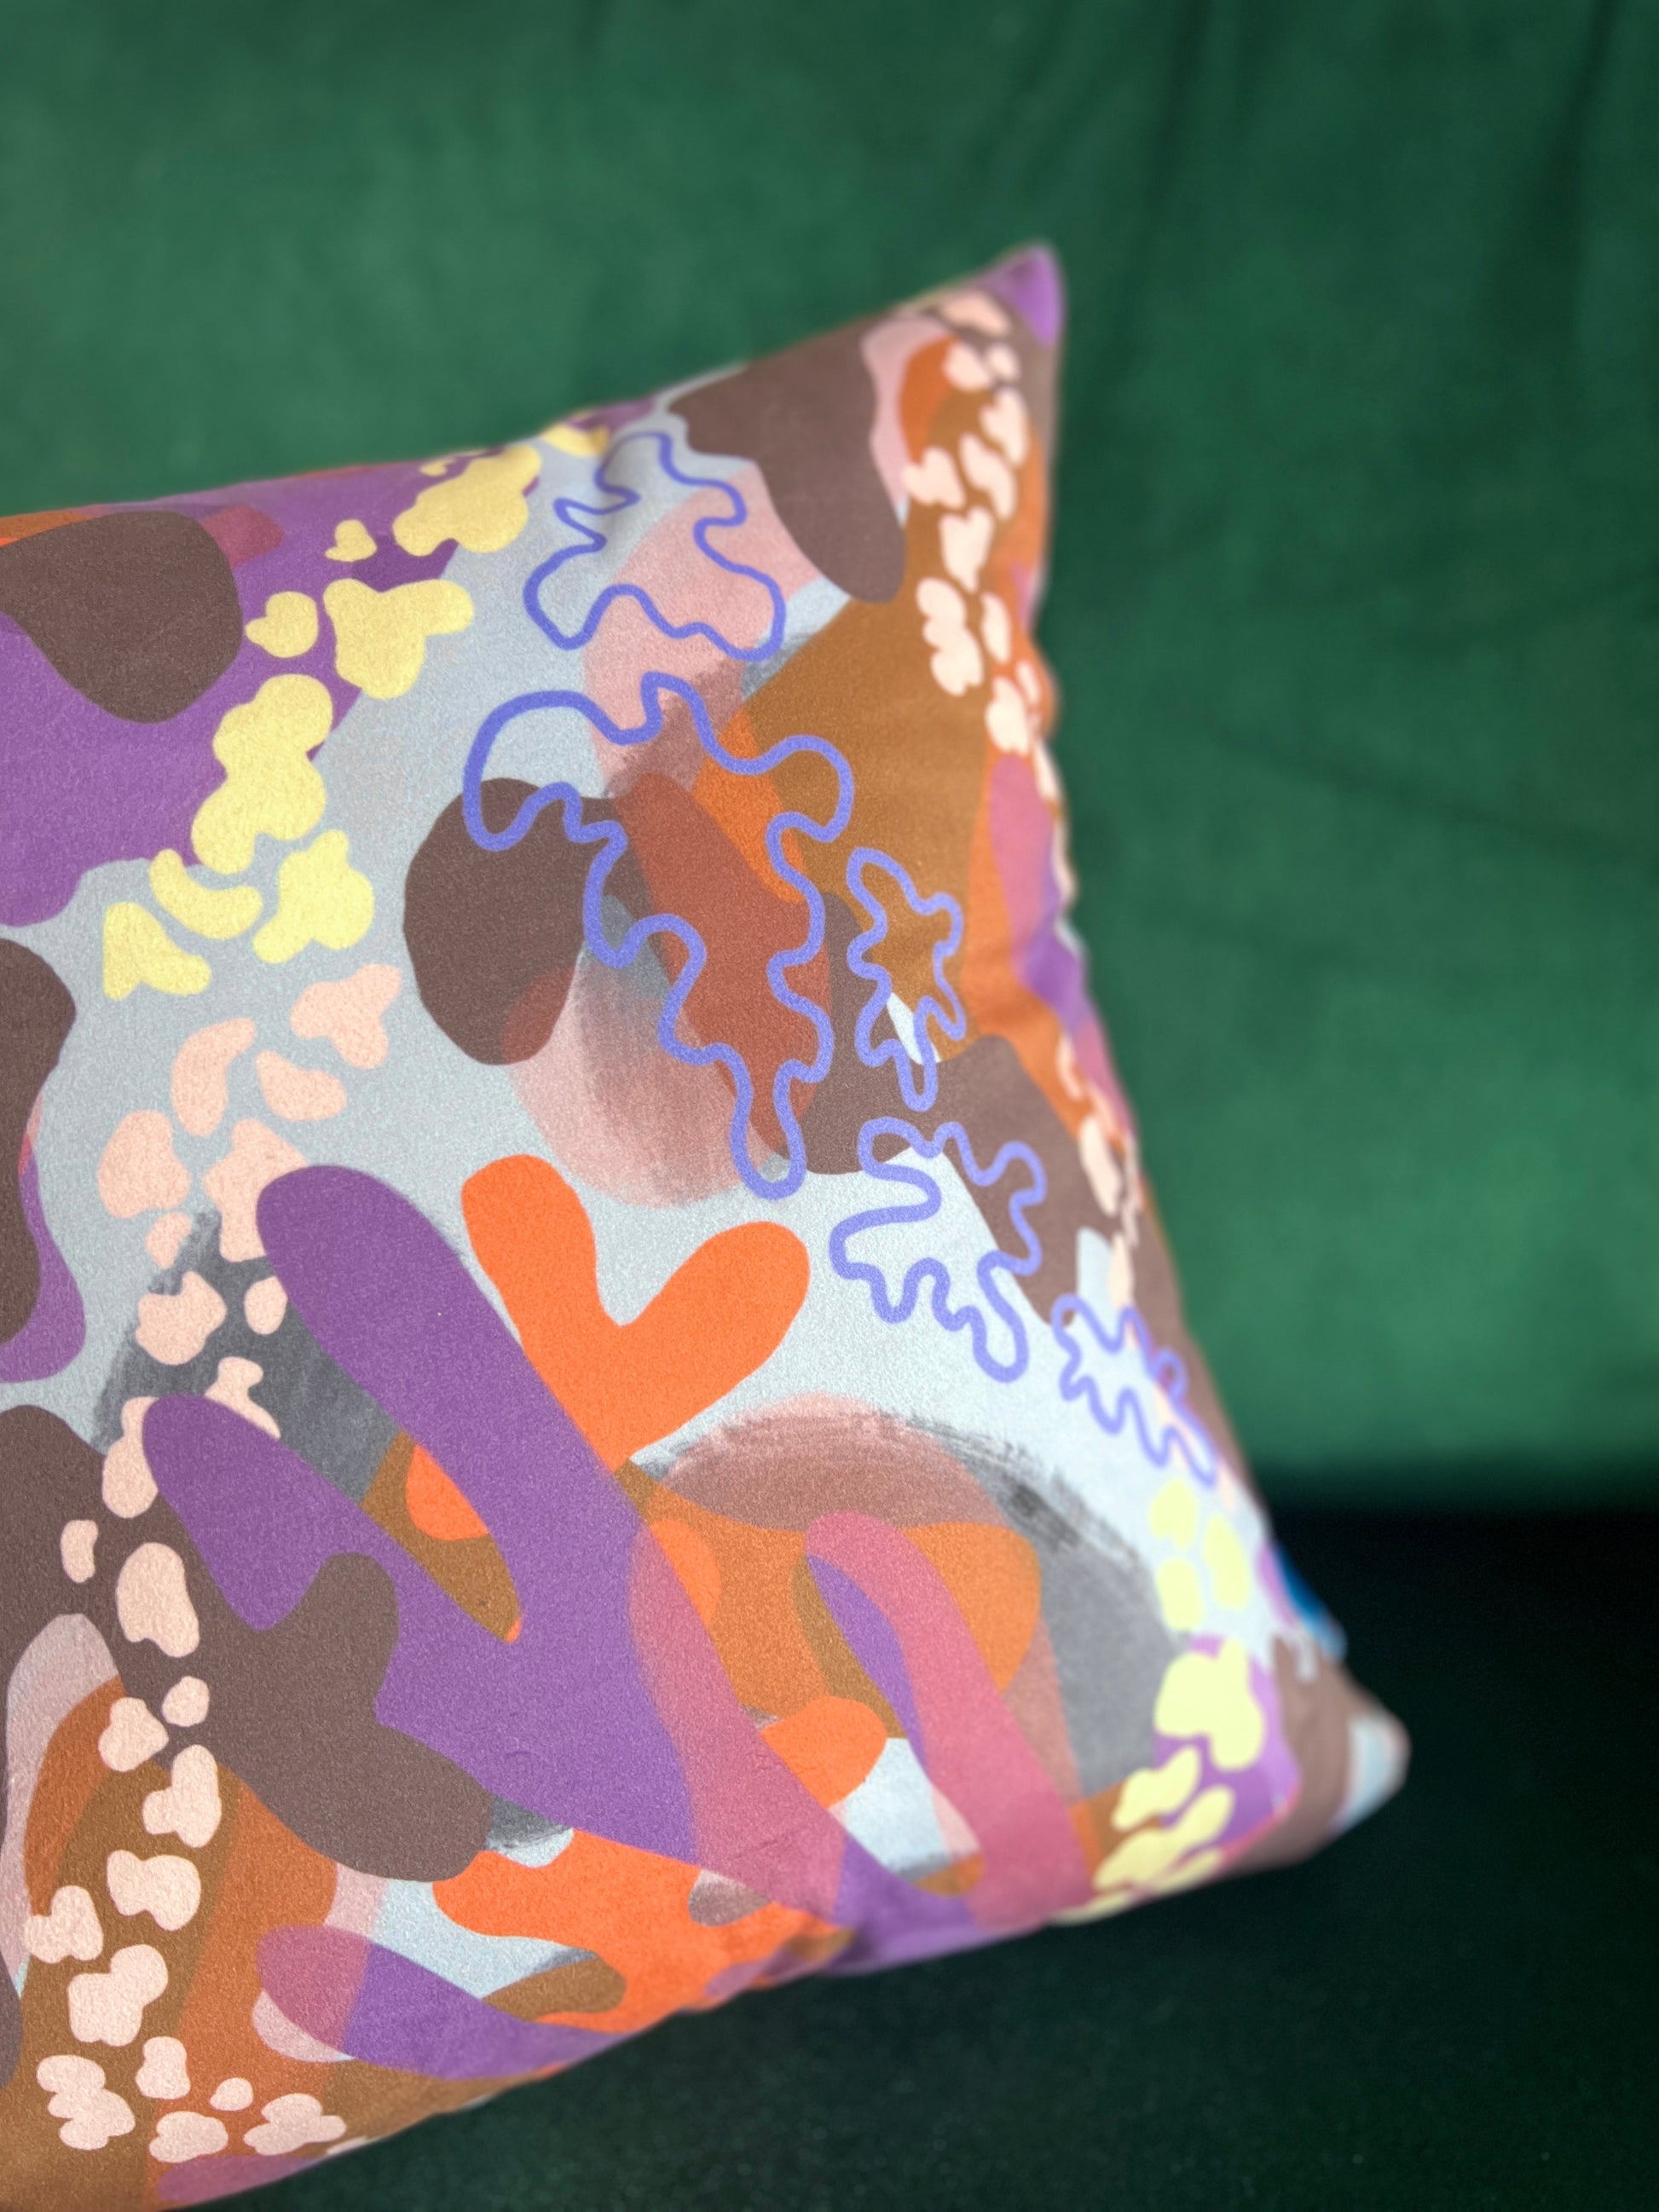 A close up of an abstract cushion on a green background. The cushion features abstract shapes and patterns in shades of purple, orange and pink.